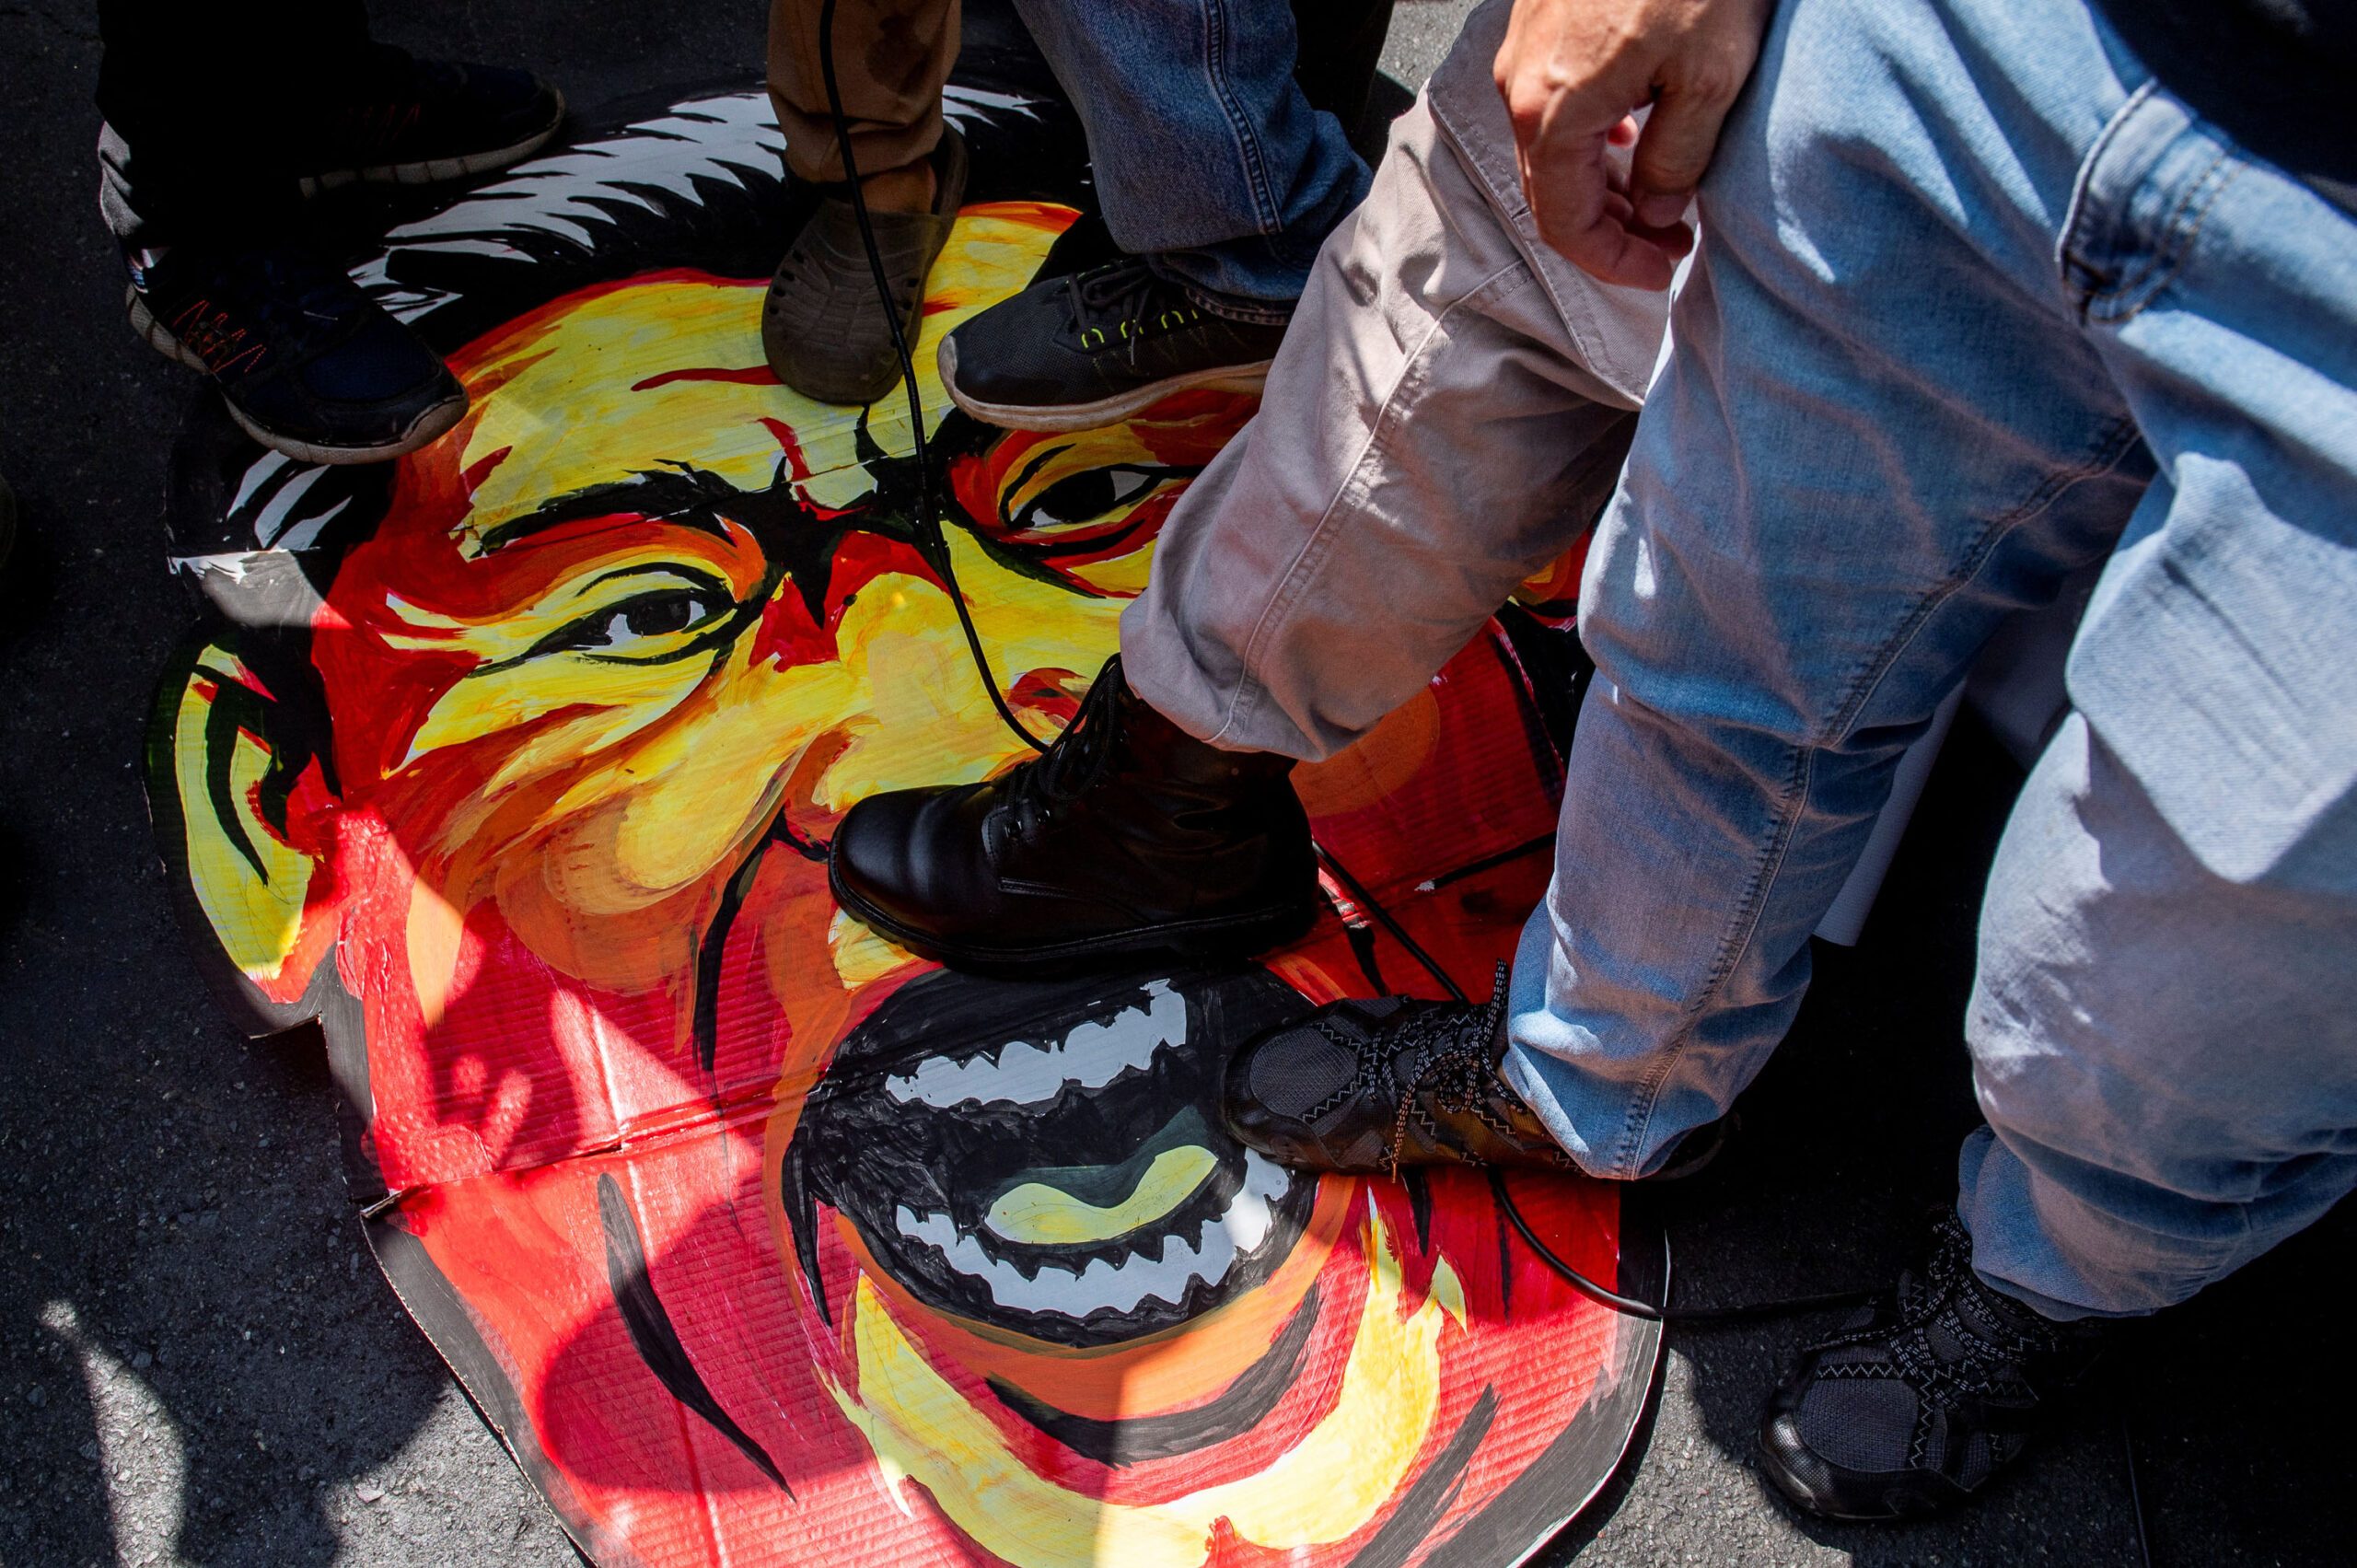 Philippine protesters trample on Xi Jinping effigy, condemn China’s maritime ‘aggression’